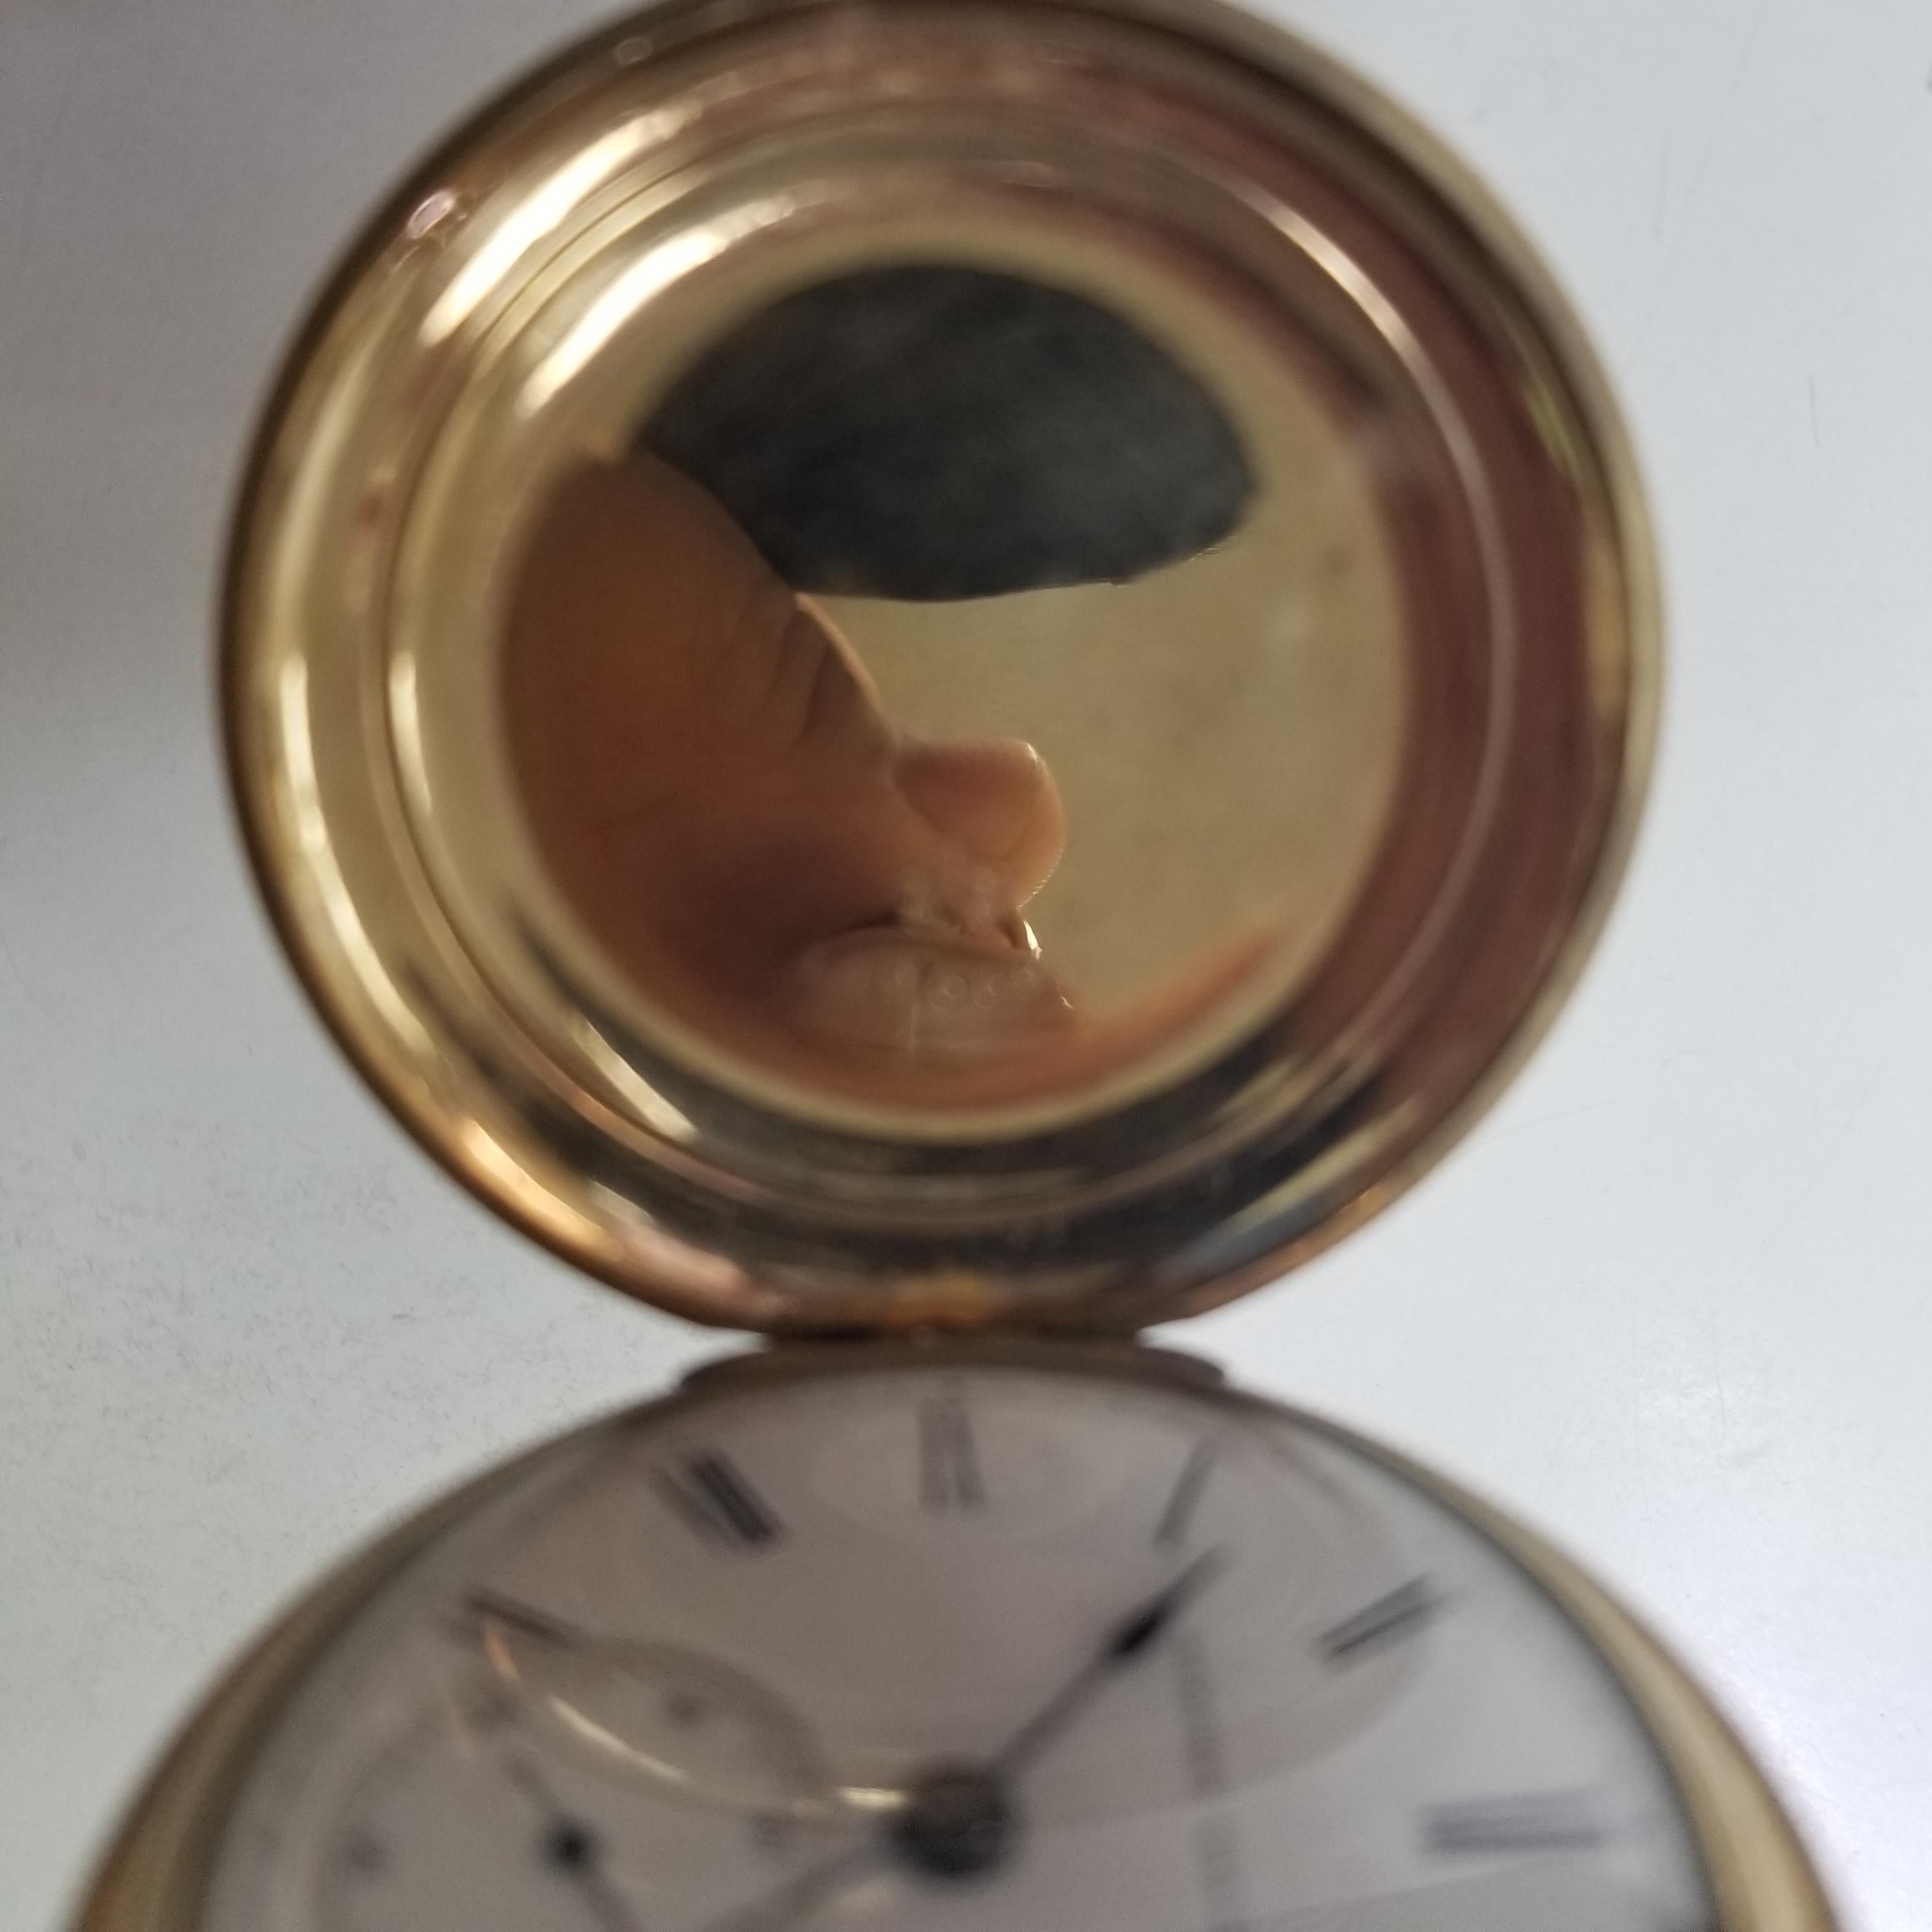 Item specifics
Condition:
Pre-owned: An item that has been used previously. The item may have some signs of cosmetic wear, but ...
Department: Unisex Adult
Case Material: Gold Plated
Year Manufactured: 1900-1909
Model: HOLY GRAIL
Dial Color: